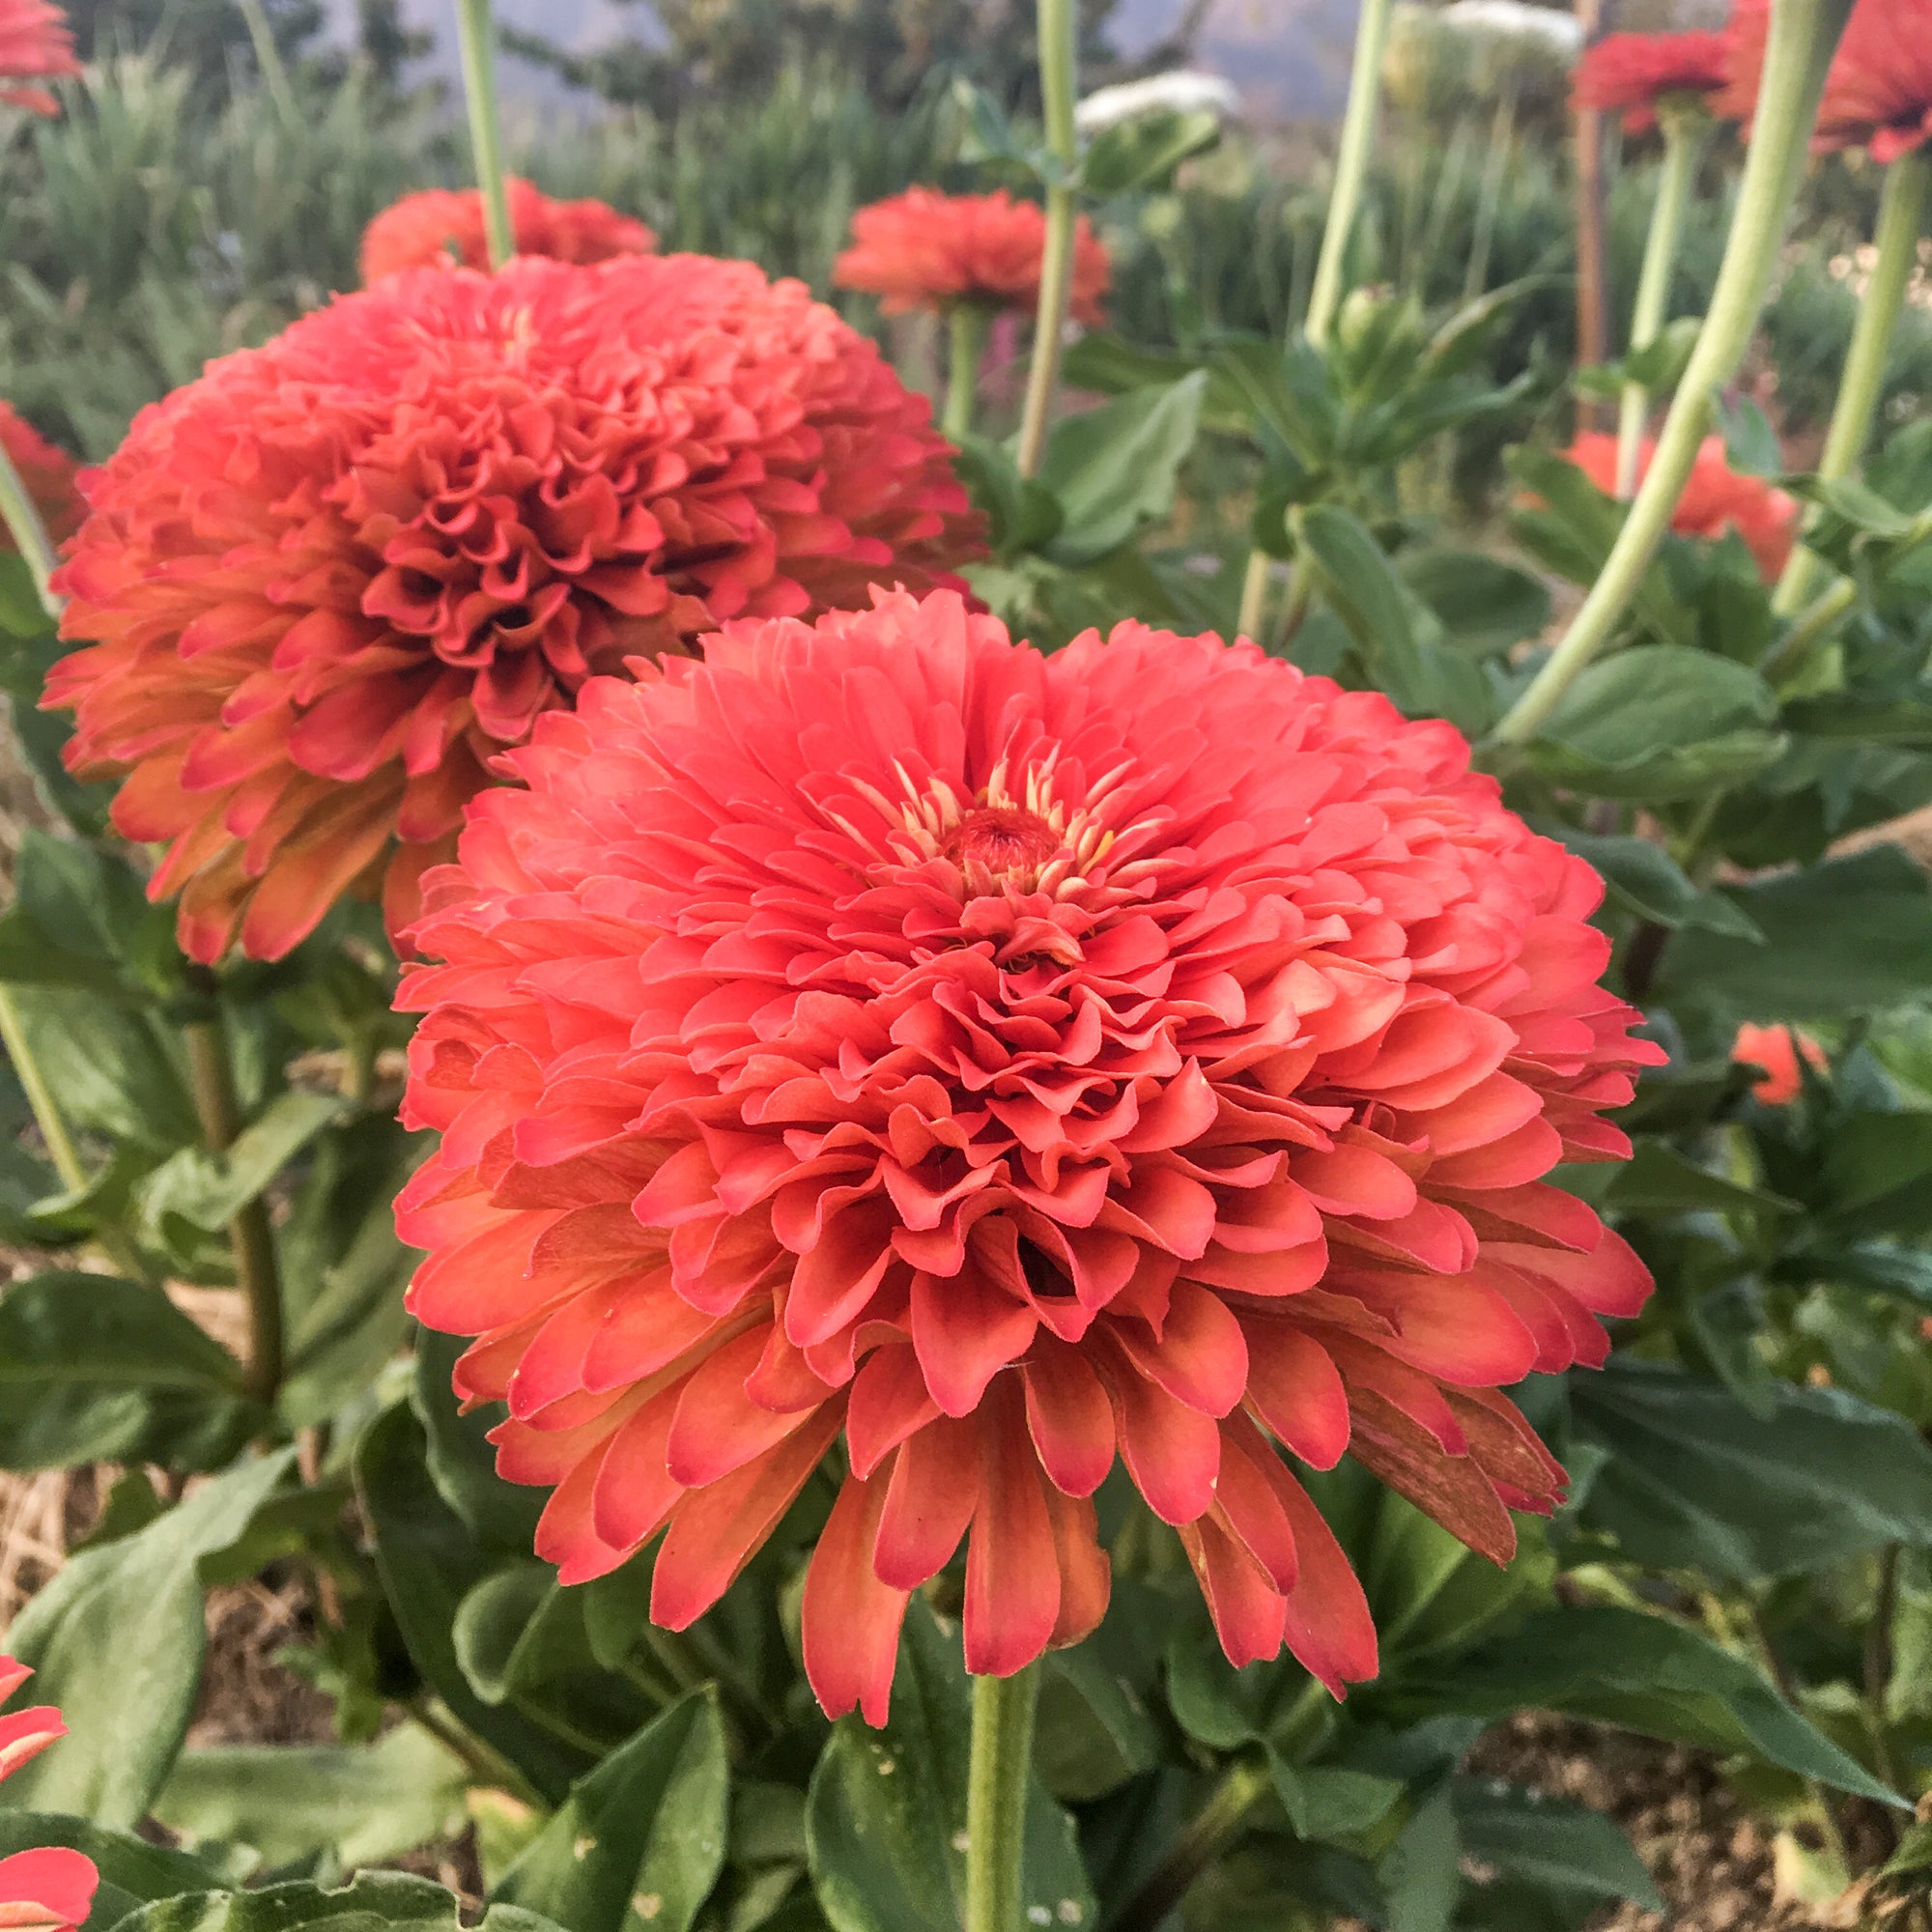 Giant Benary's Coral Zinnia in bloom